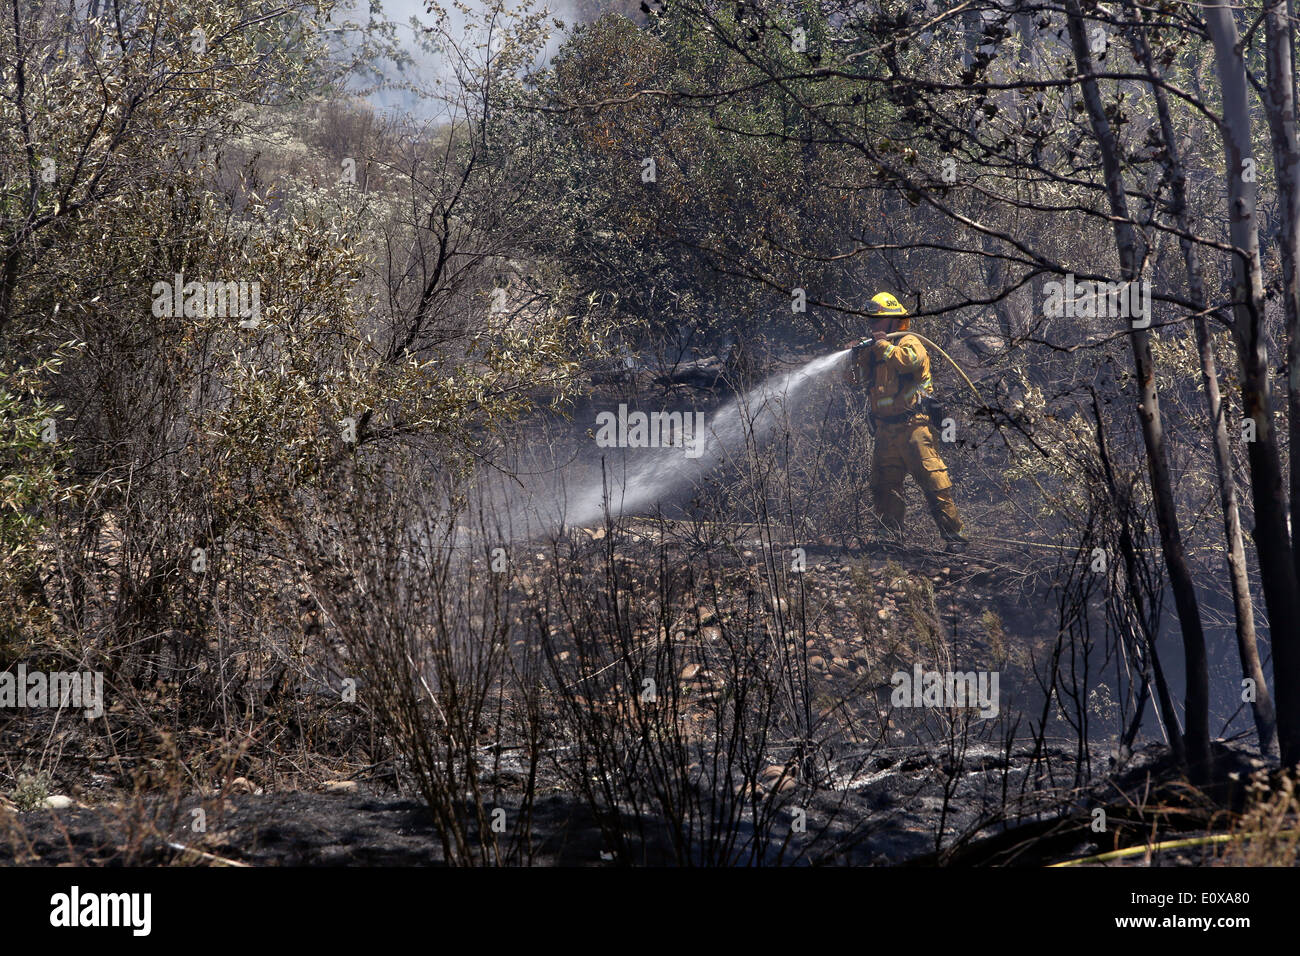 Calfire crews fight the Las Pulgas wildfire as it burns through the foothills around the Marine Corps Air Station May 17, 2014 in Camp Pendleton, California. The Las Pulgas Wildfire on Camp Pendleton has burned more than 15,000 acres and is the largest fire in San Diego County history. Stock Photo